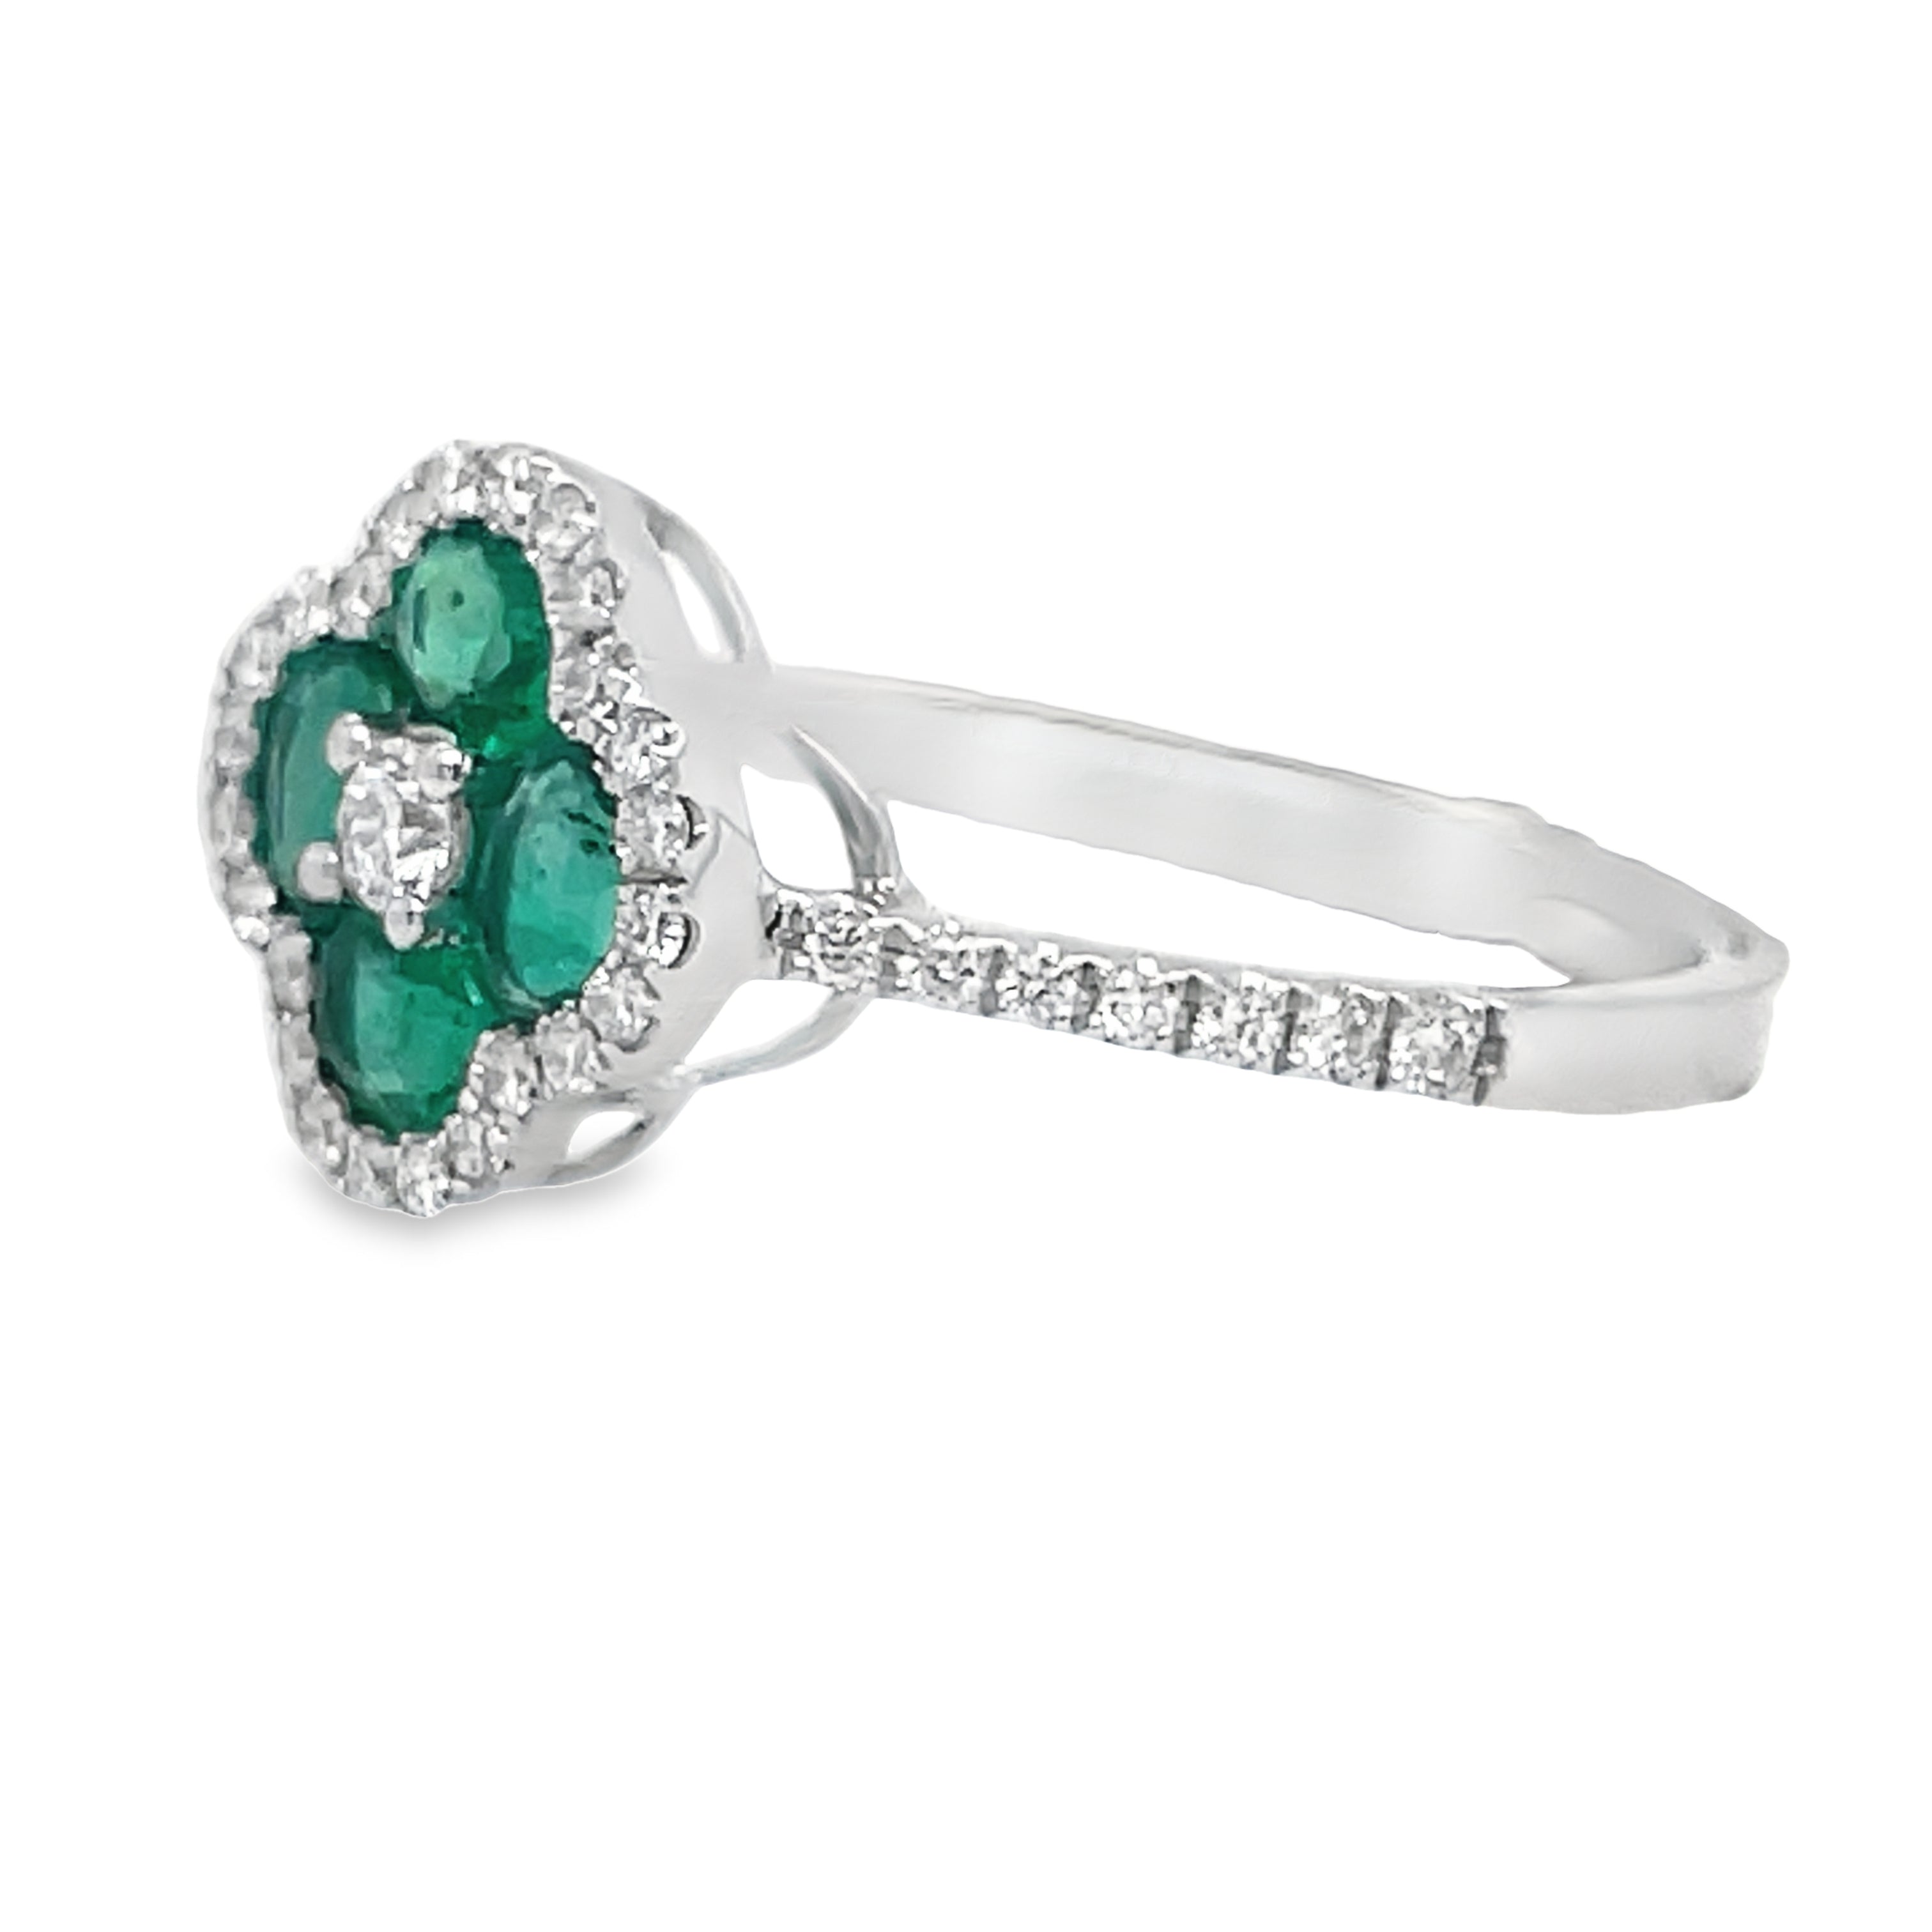 This elegant ring features a stunning floral design with a 14k yellow gold band, surrounded by sparkling white round diamonds totaling 0.25 carats. The centerpiece includes four round emeralds, totaling 0.70 carats and measuring 11mm in diameter. Add a touch of sophistication and luxury to any outfit with this beautiful piece.